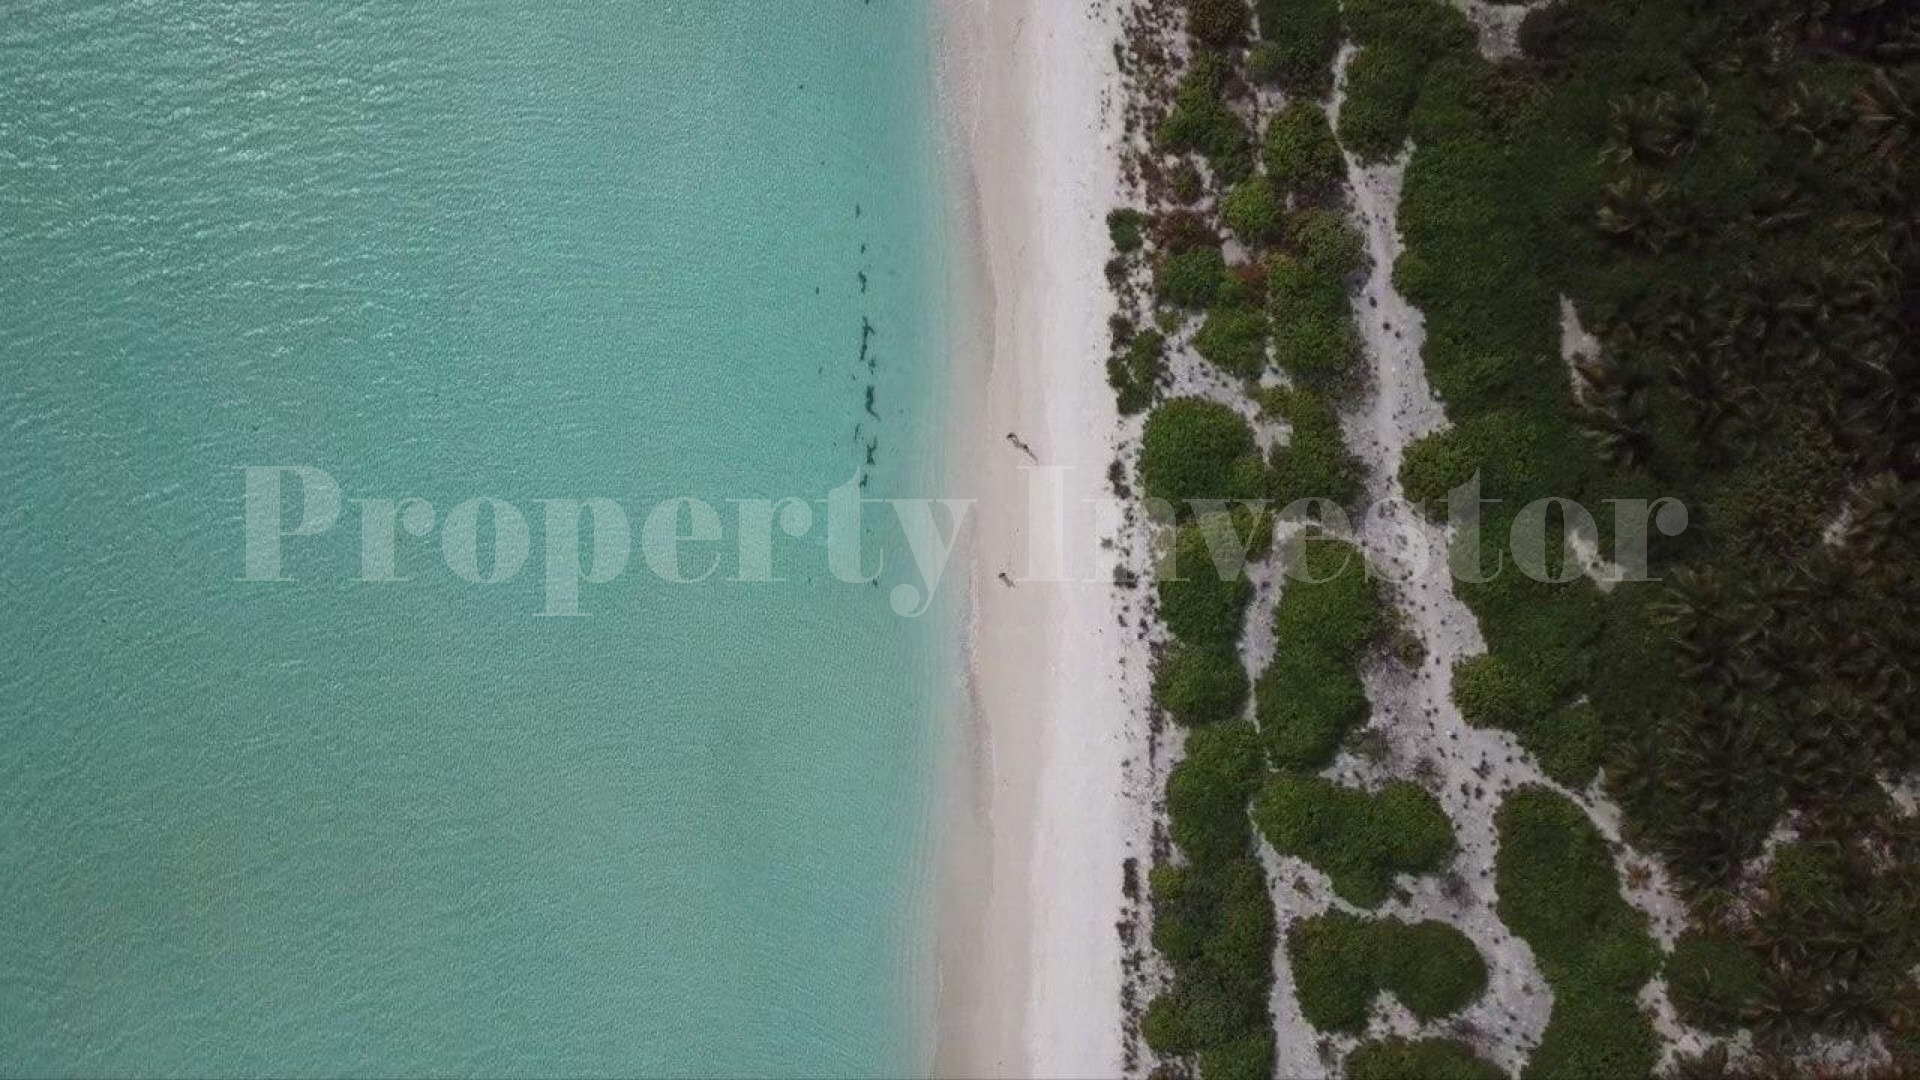 Picturesque 7.4 Hectare Virgin Island for Resort Development in the Maldives